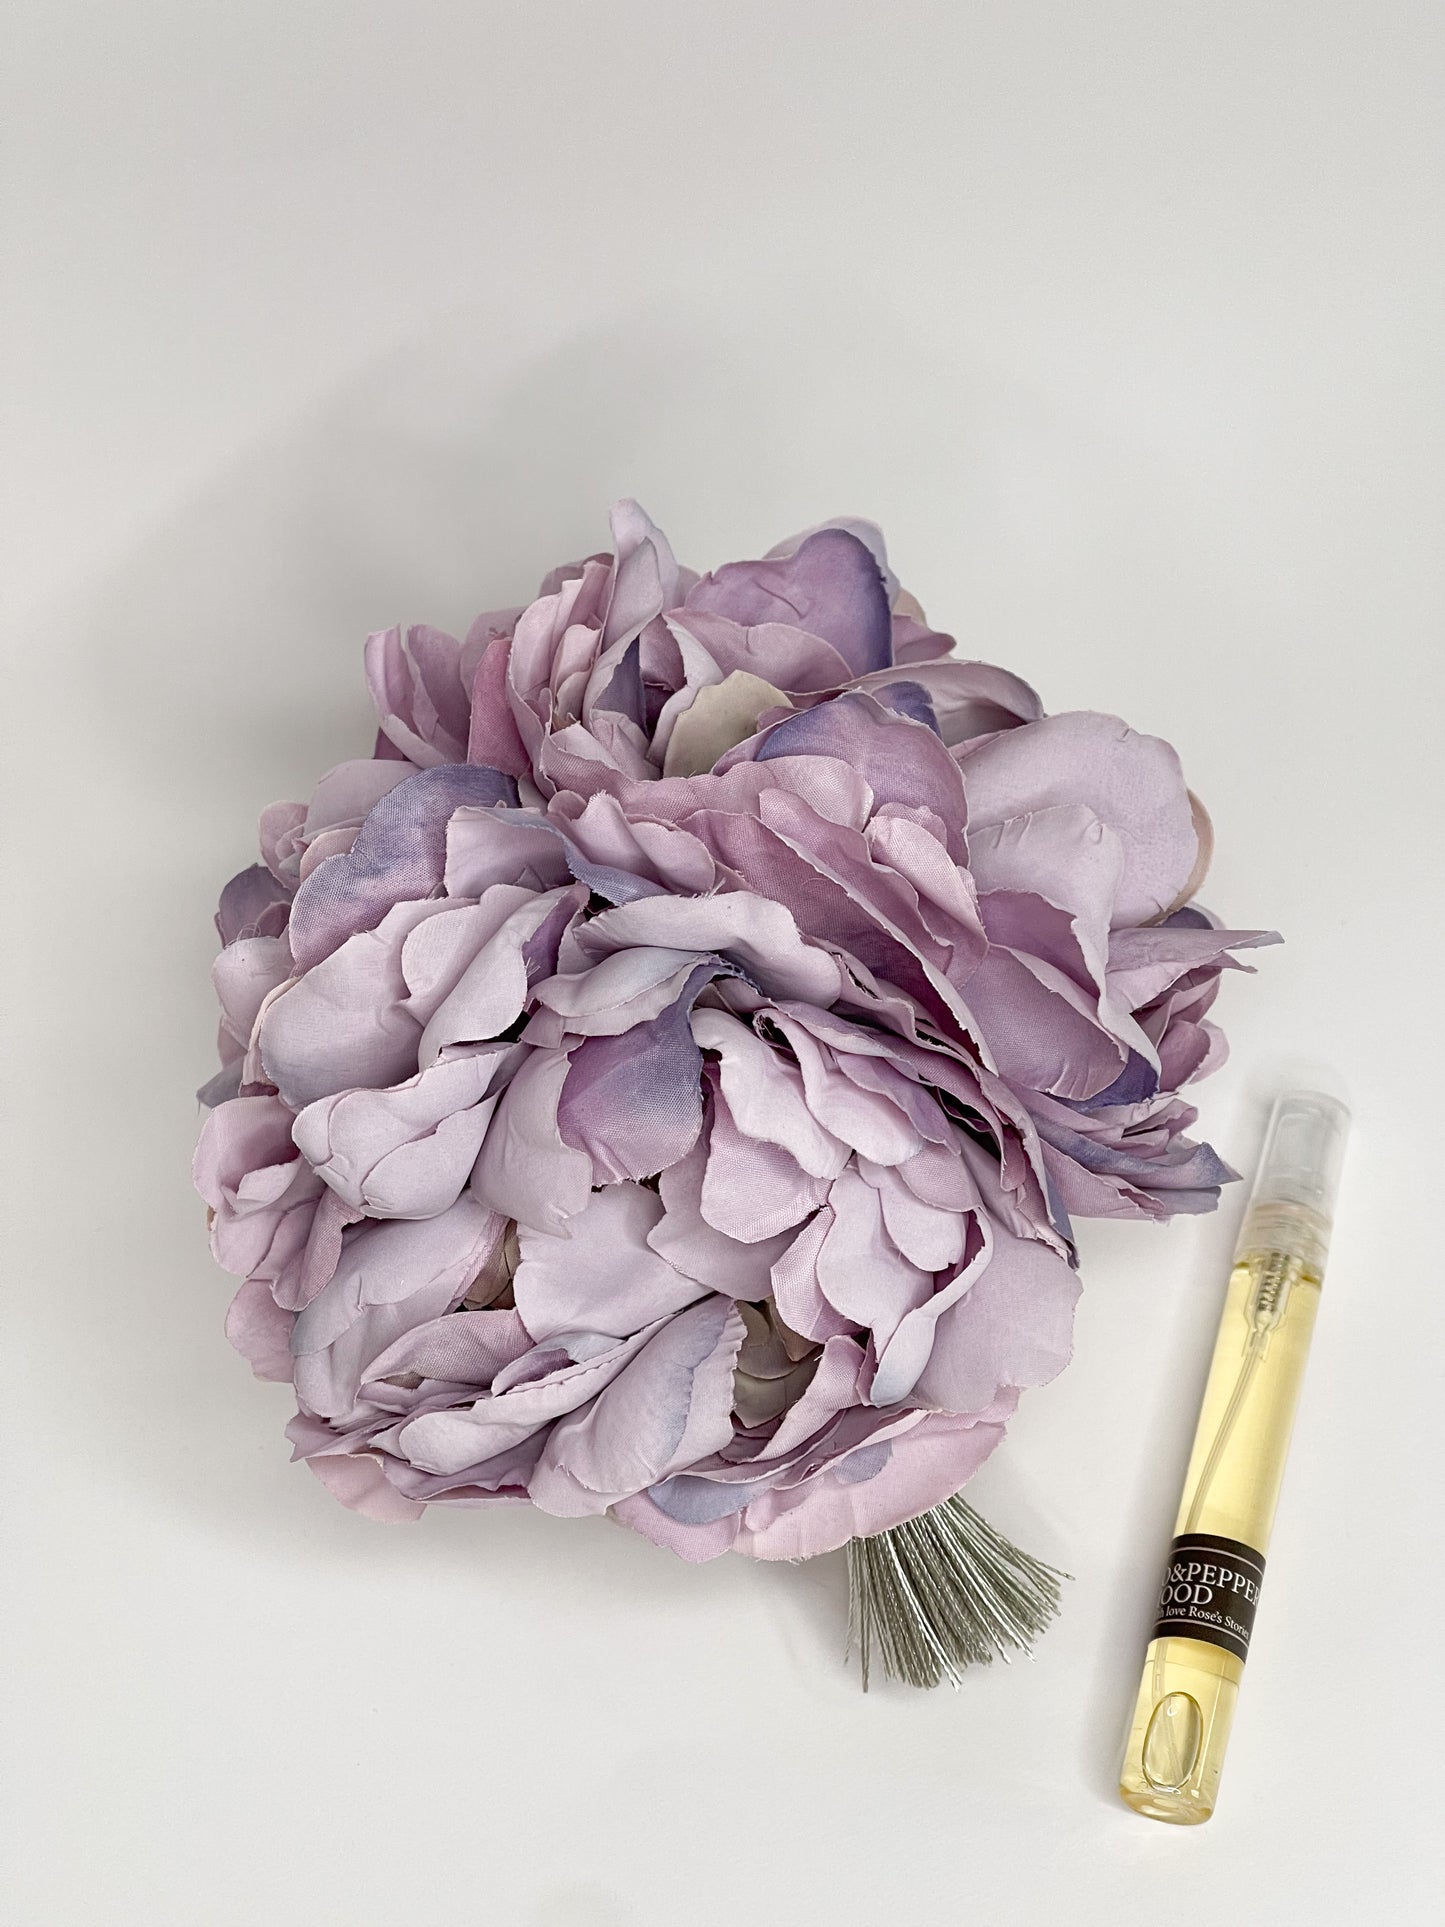 Home fragrance "Lilac peonies"